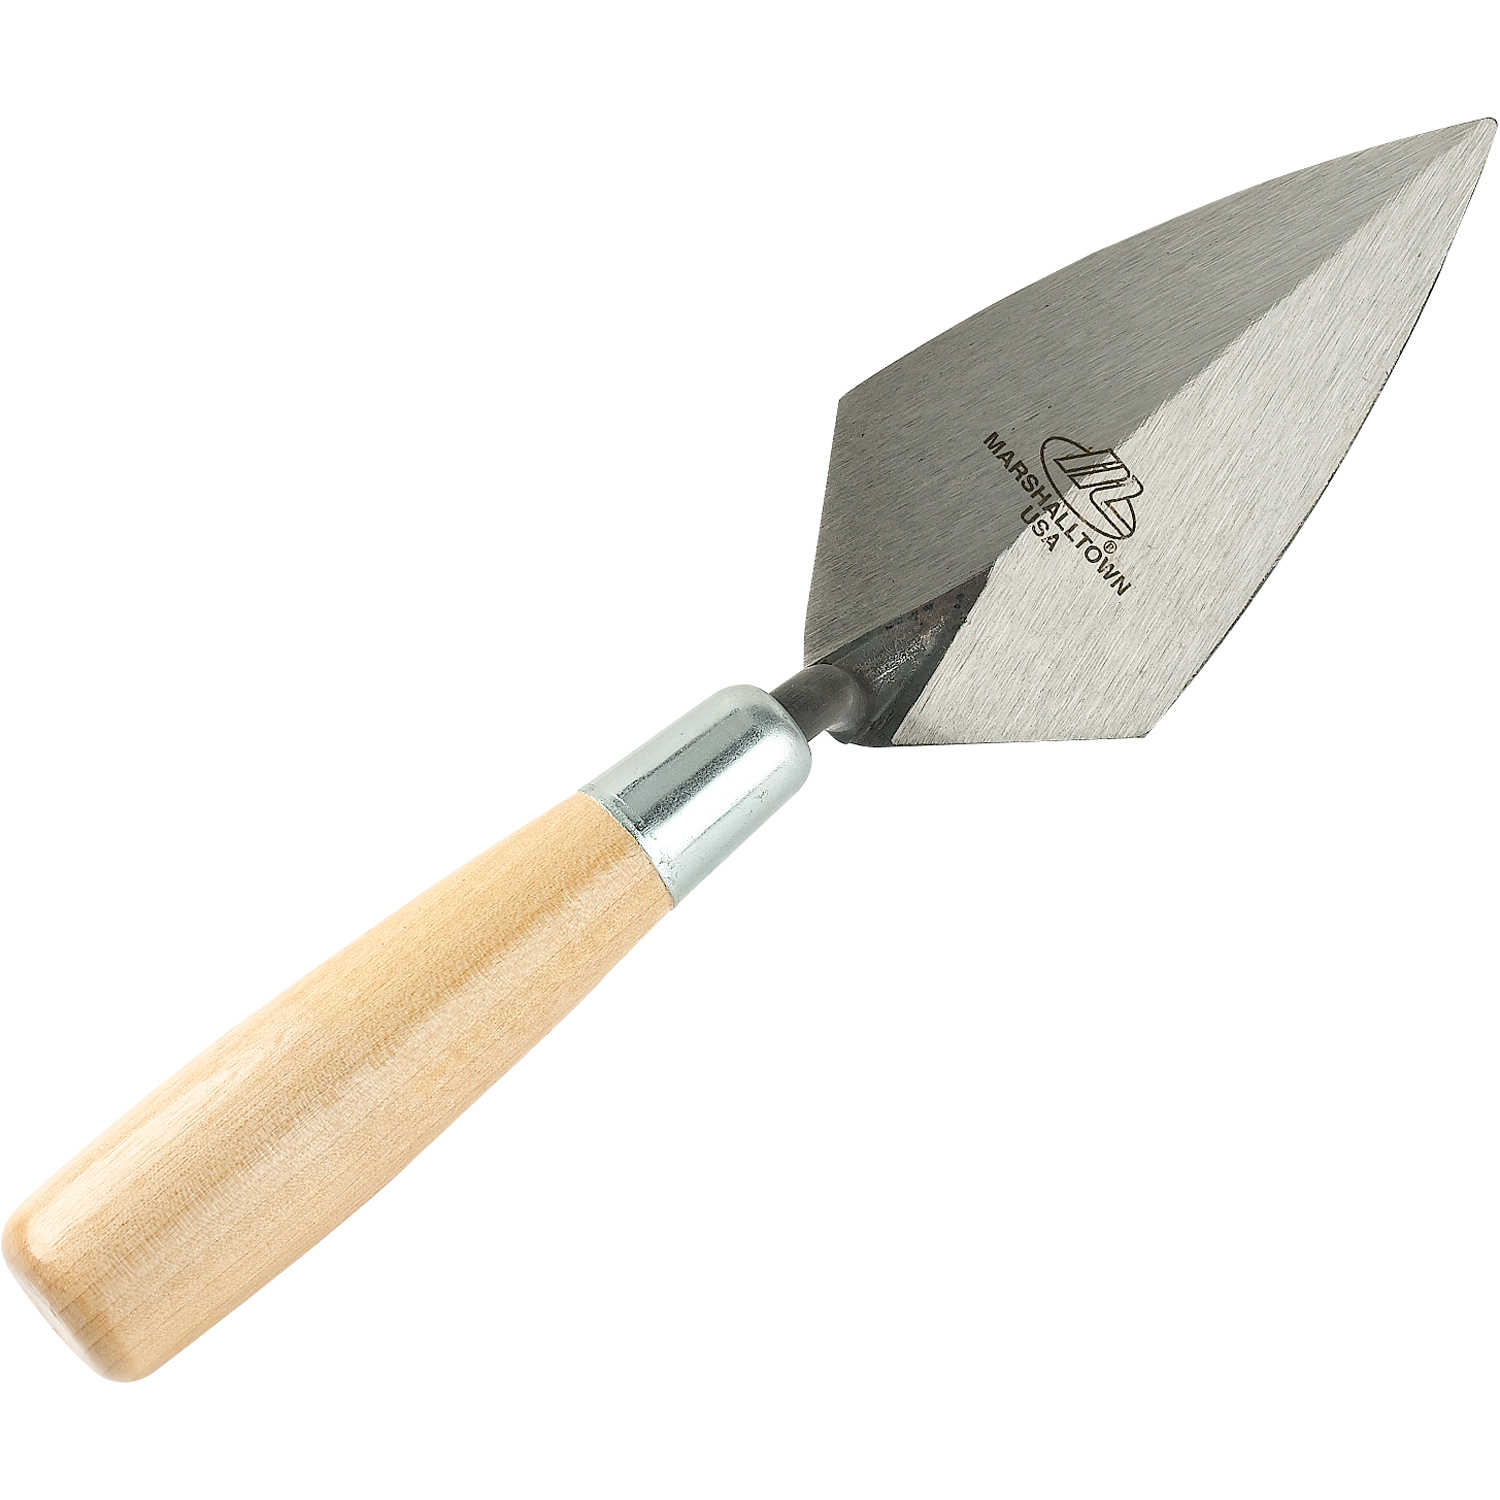 Marshalltown Trowels | Forestry Suppliers, Inc.